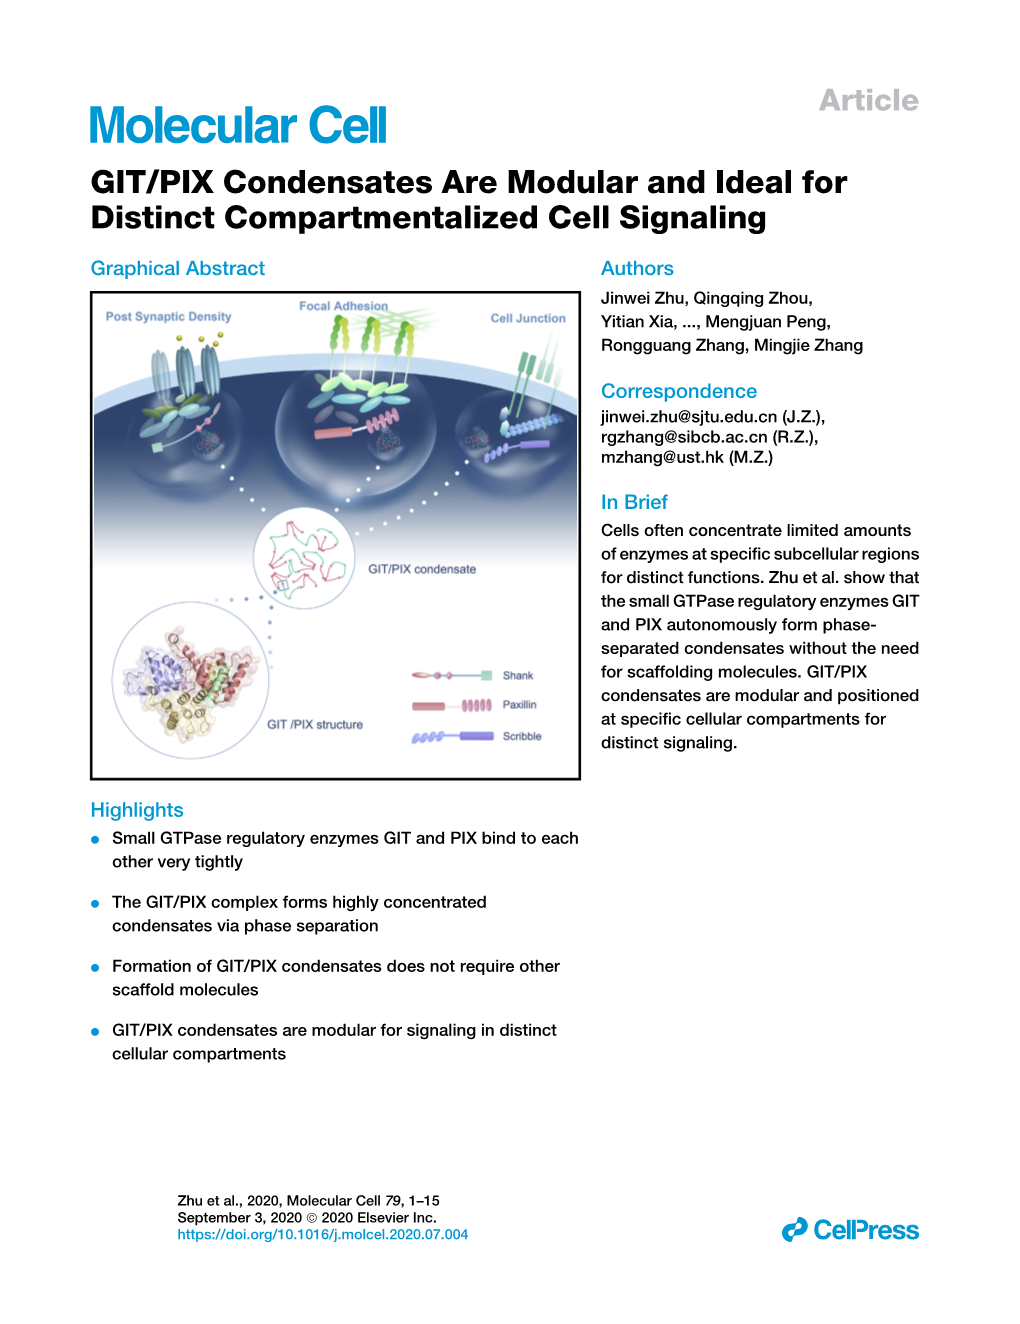 GIT/PIX Condensates Are Modular and Ideal for Distinct Compartmentalized Cell Signaling